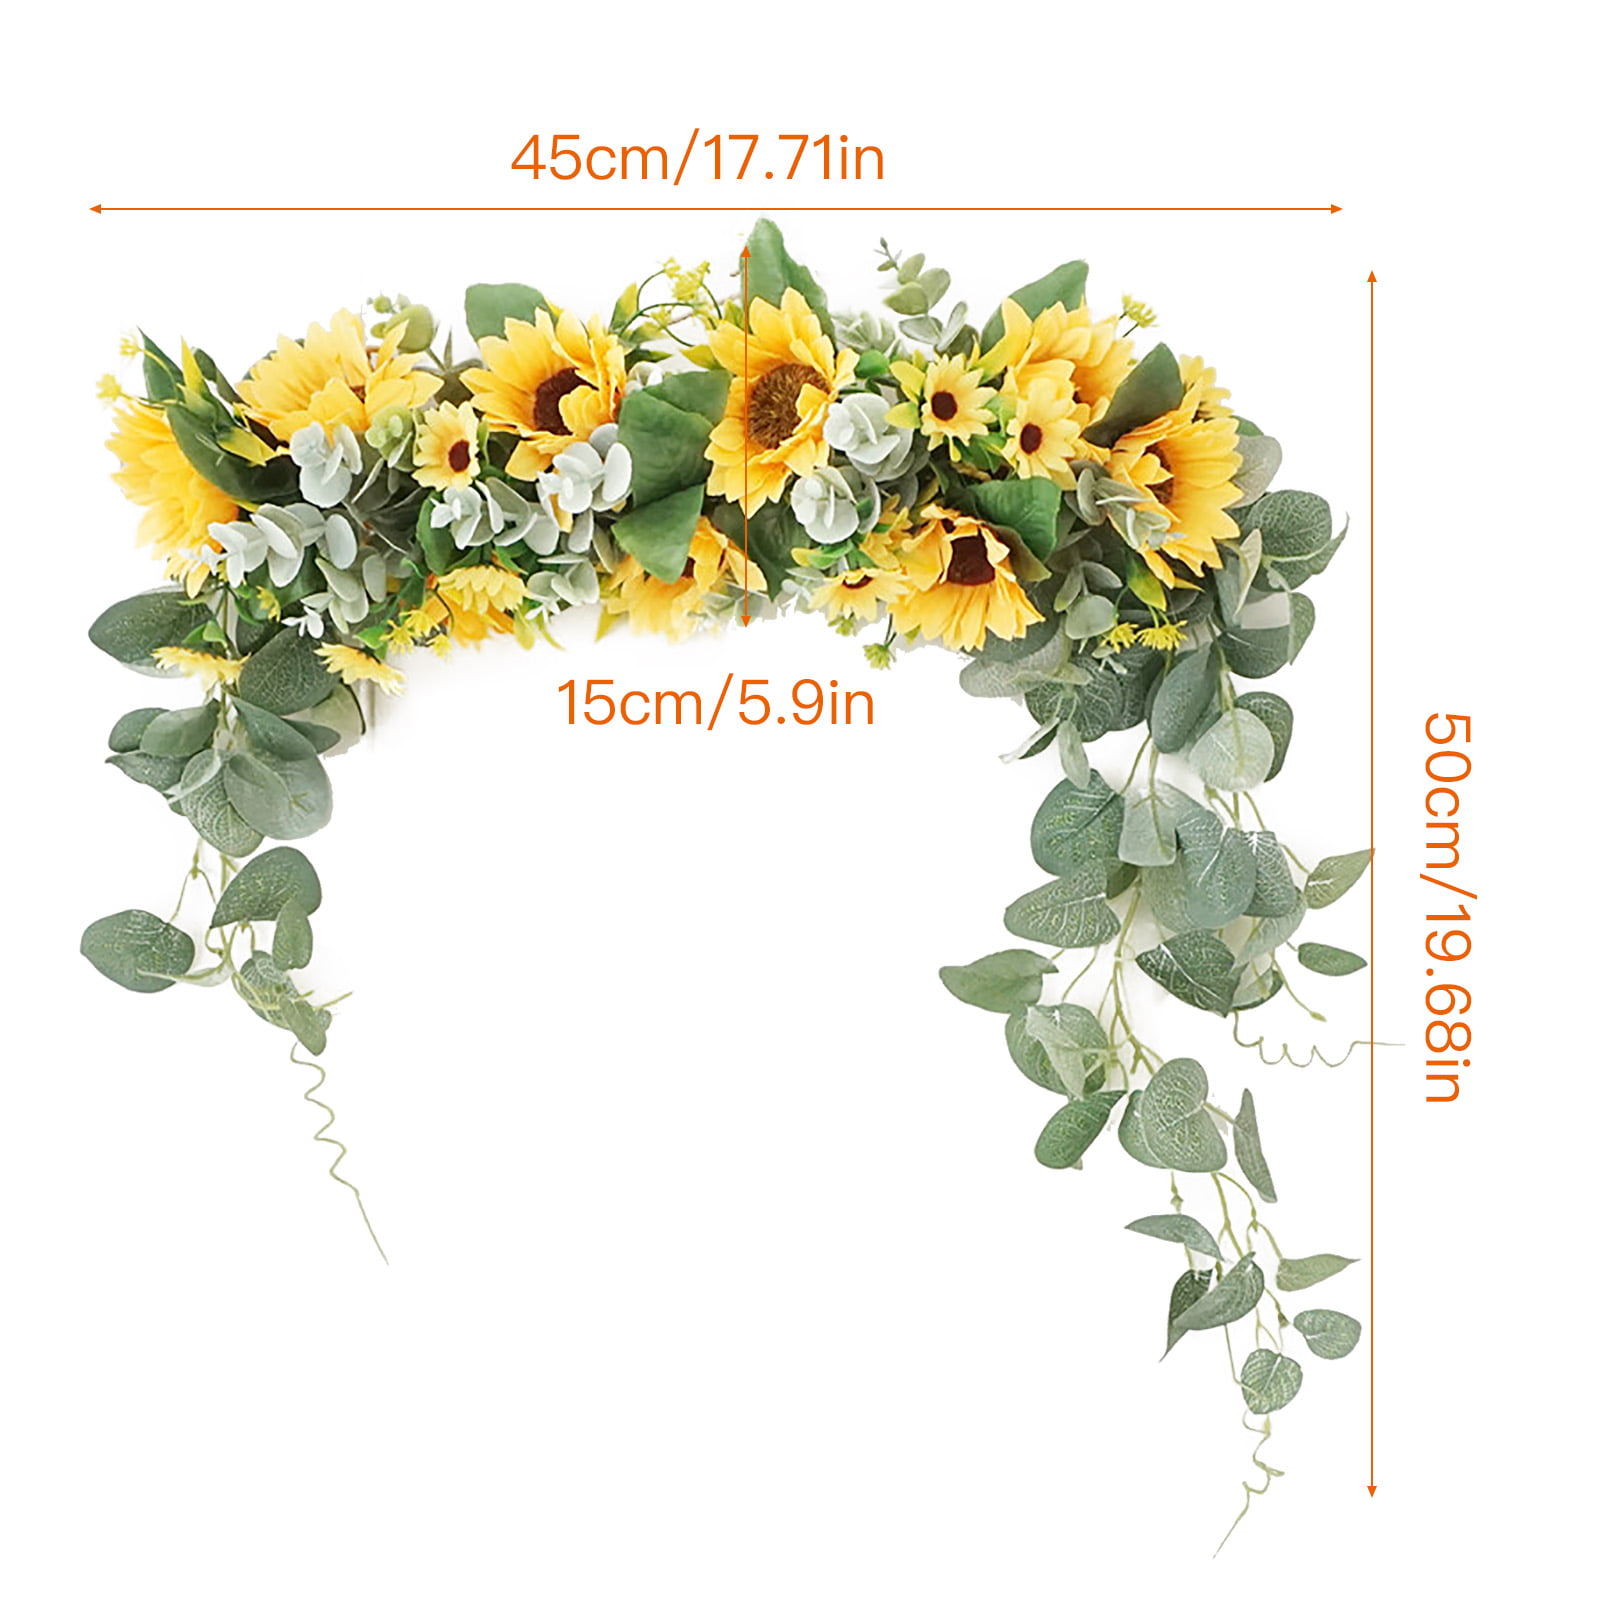 æ— Wedding Peony Backdrop Flowers Handmade Swag with Green Leaves Swag Artificial Peony Flower Swag for Wedding Arch Front Door Wall Decor